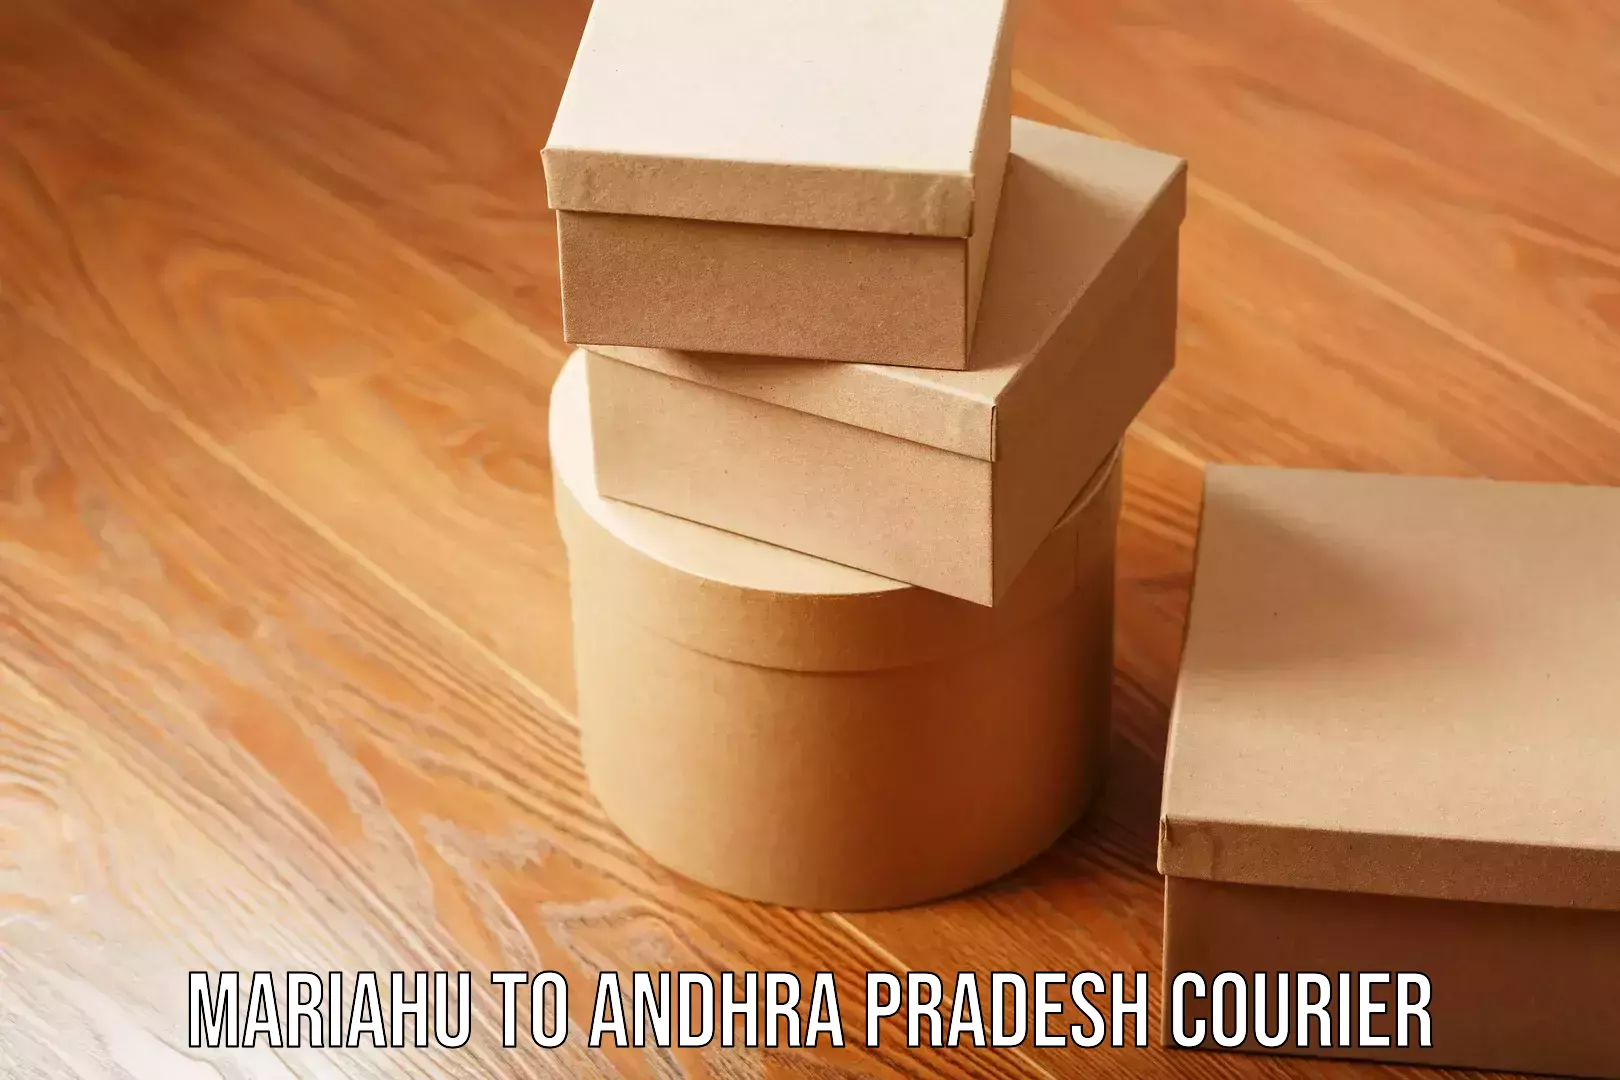 Efficient moving services in Mariahu to Andhra Pradesh